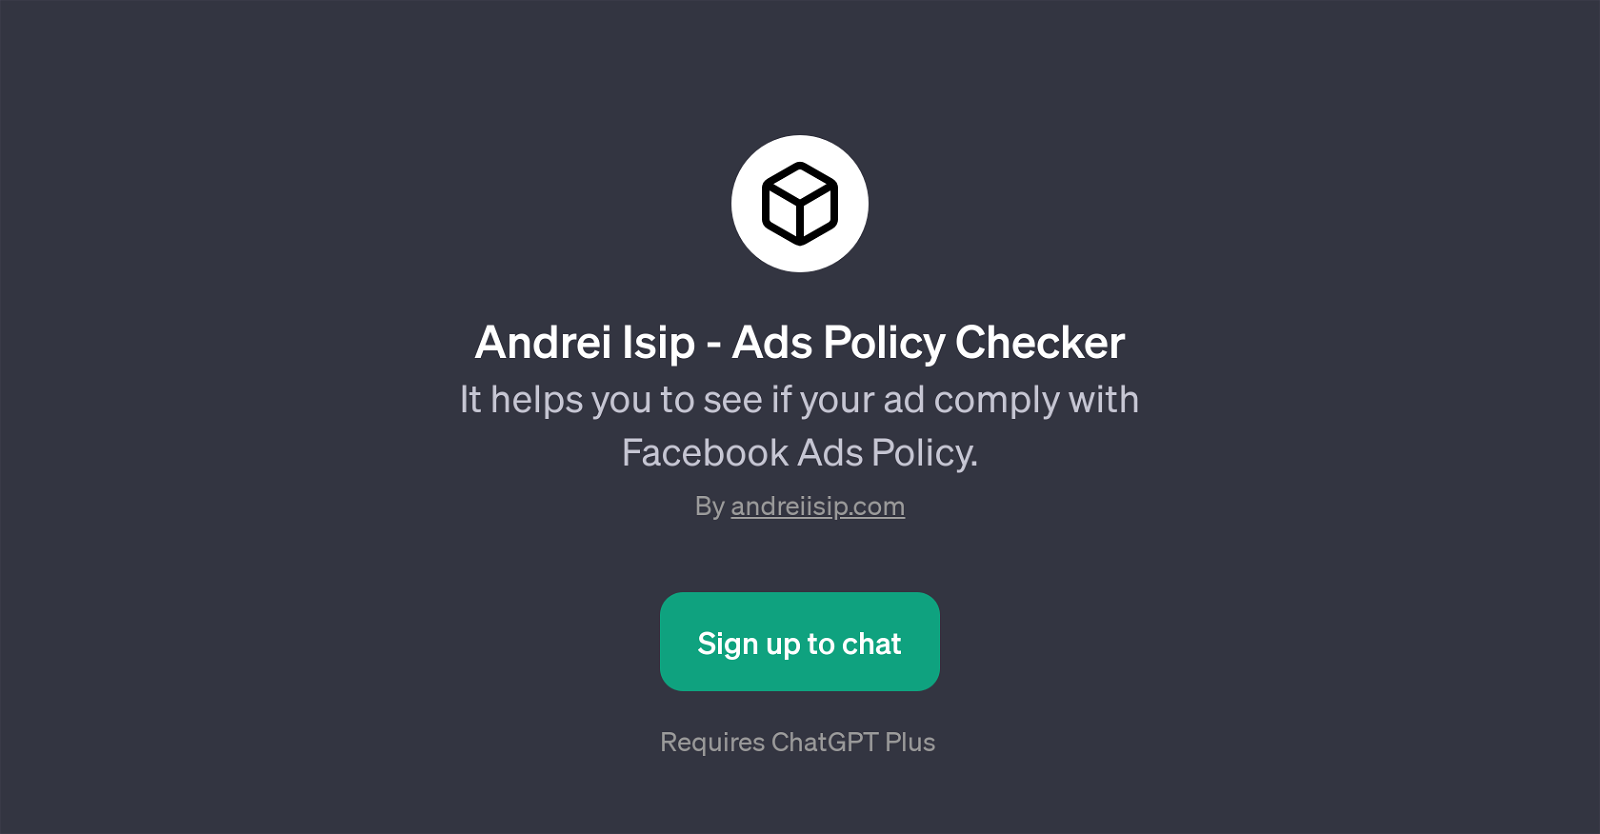 Andrei Isip - Ads Policy Checker website